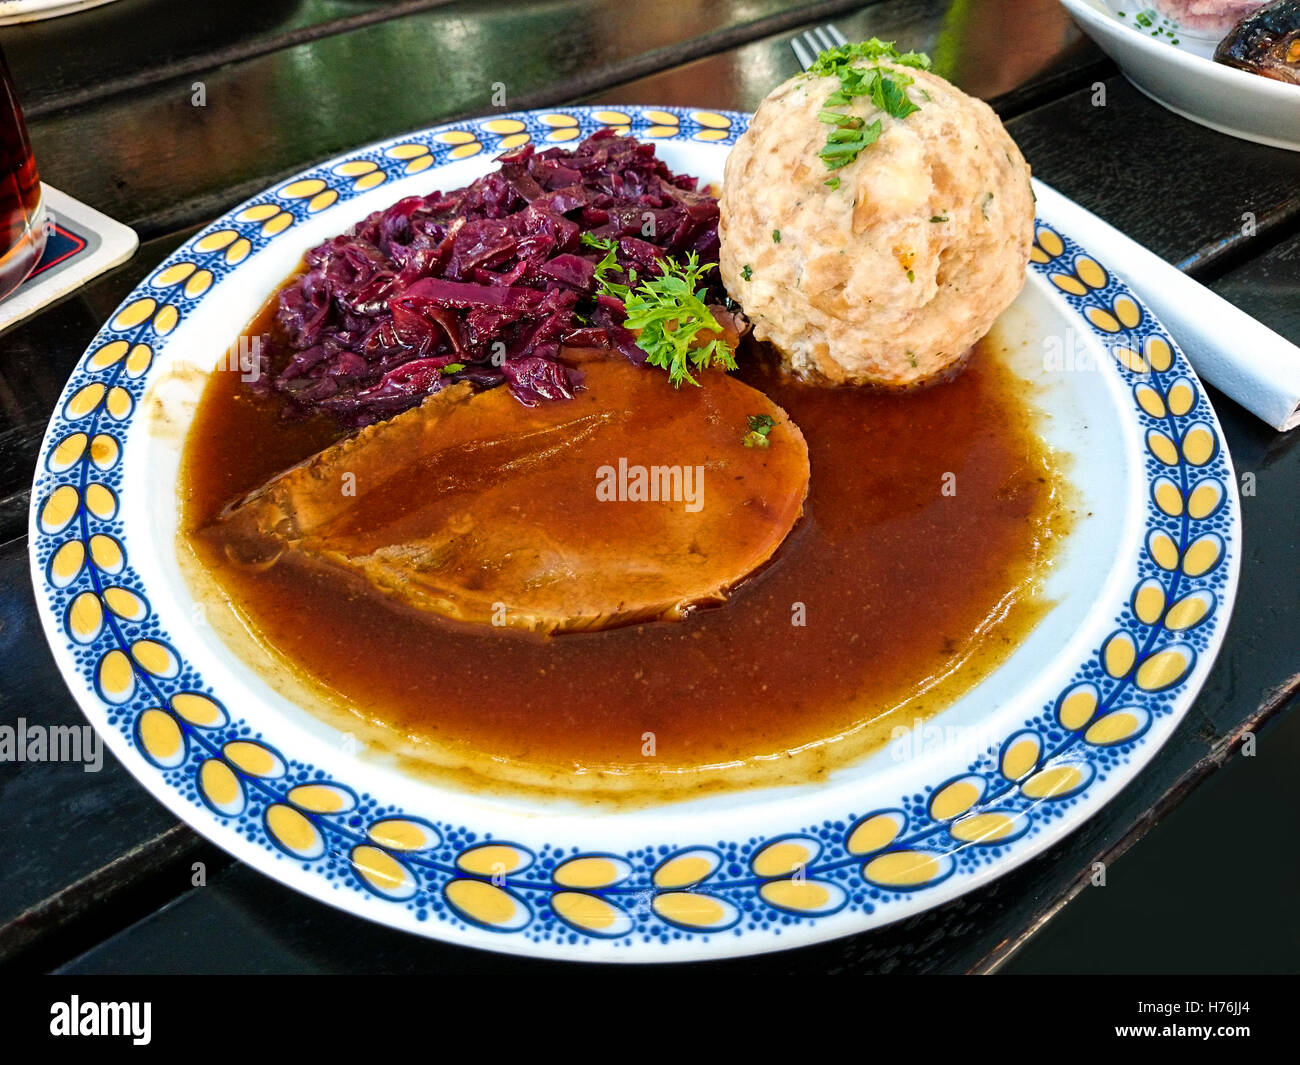 Bavarian Sauerbraten of beef with red cabbage and bread dumplings Stock Photo